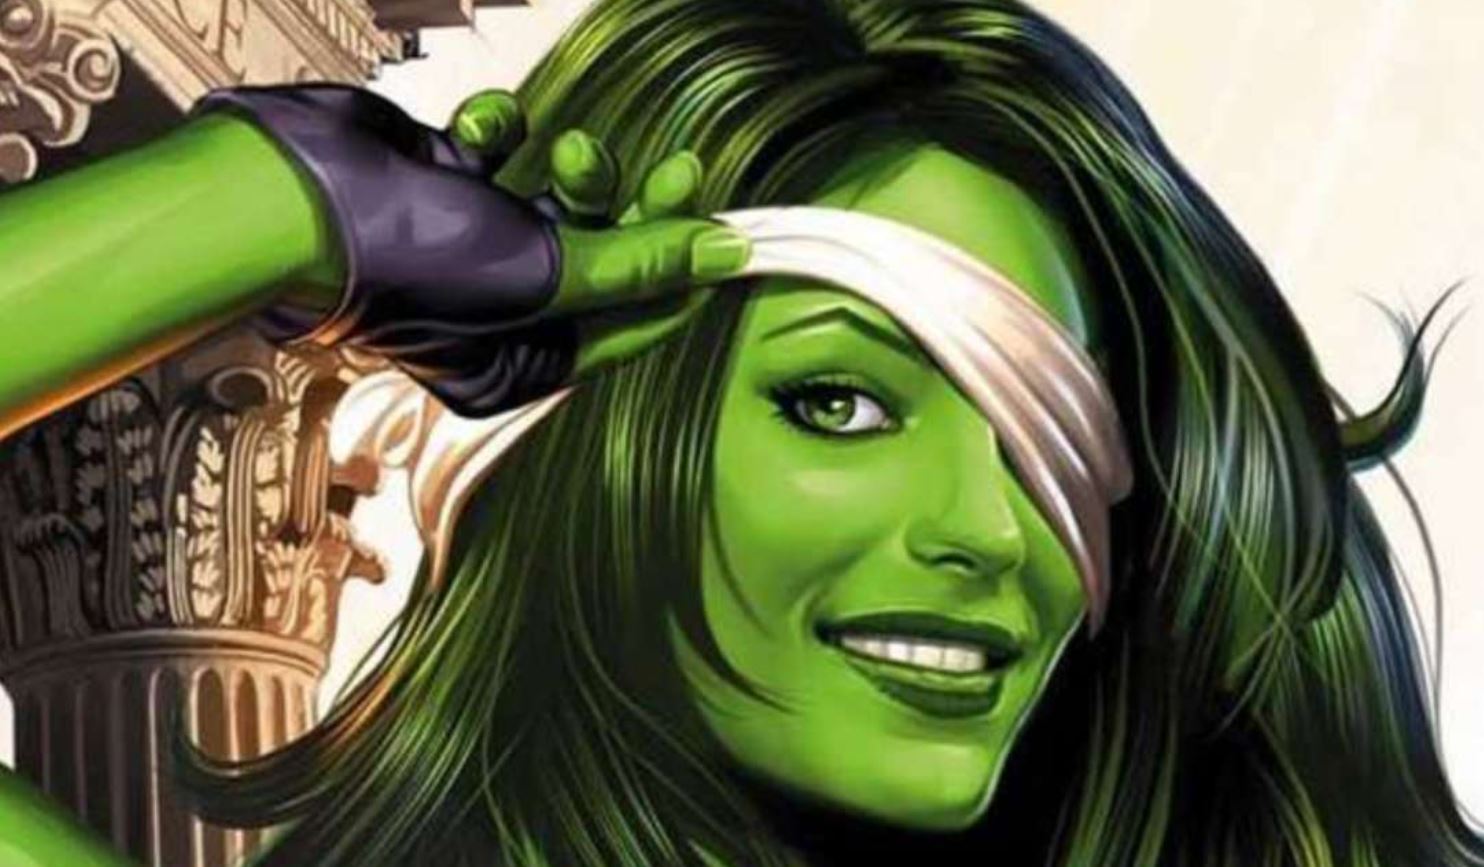 One of the female versions of the Marvel superheroes: She-Hulk.